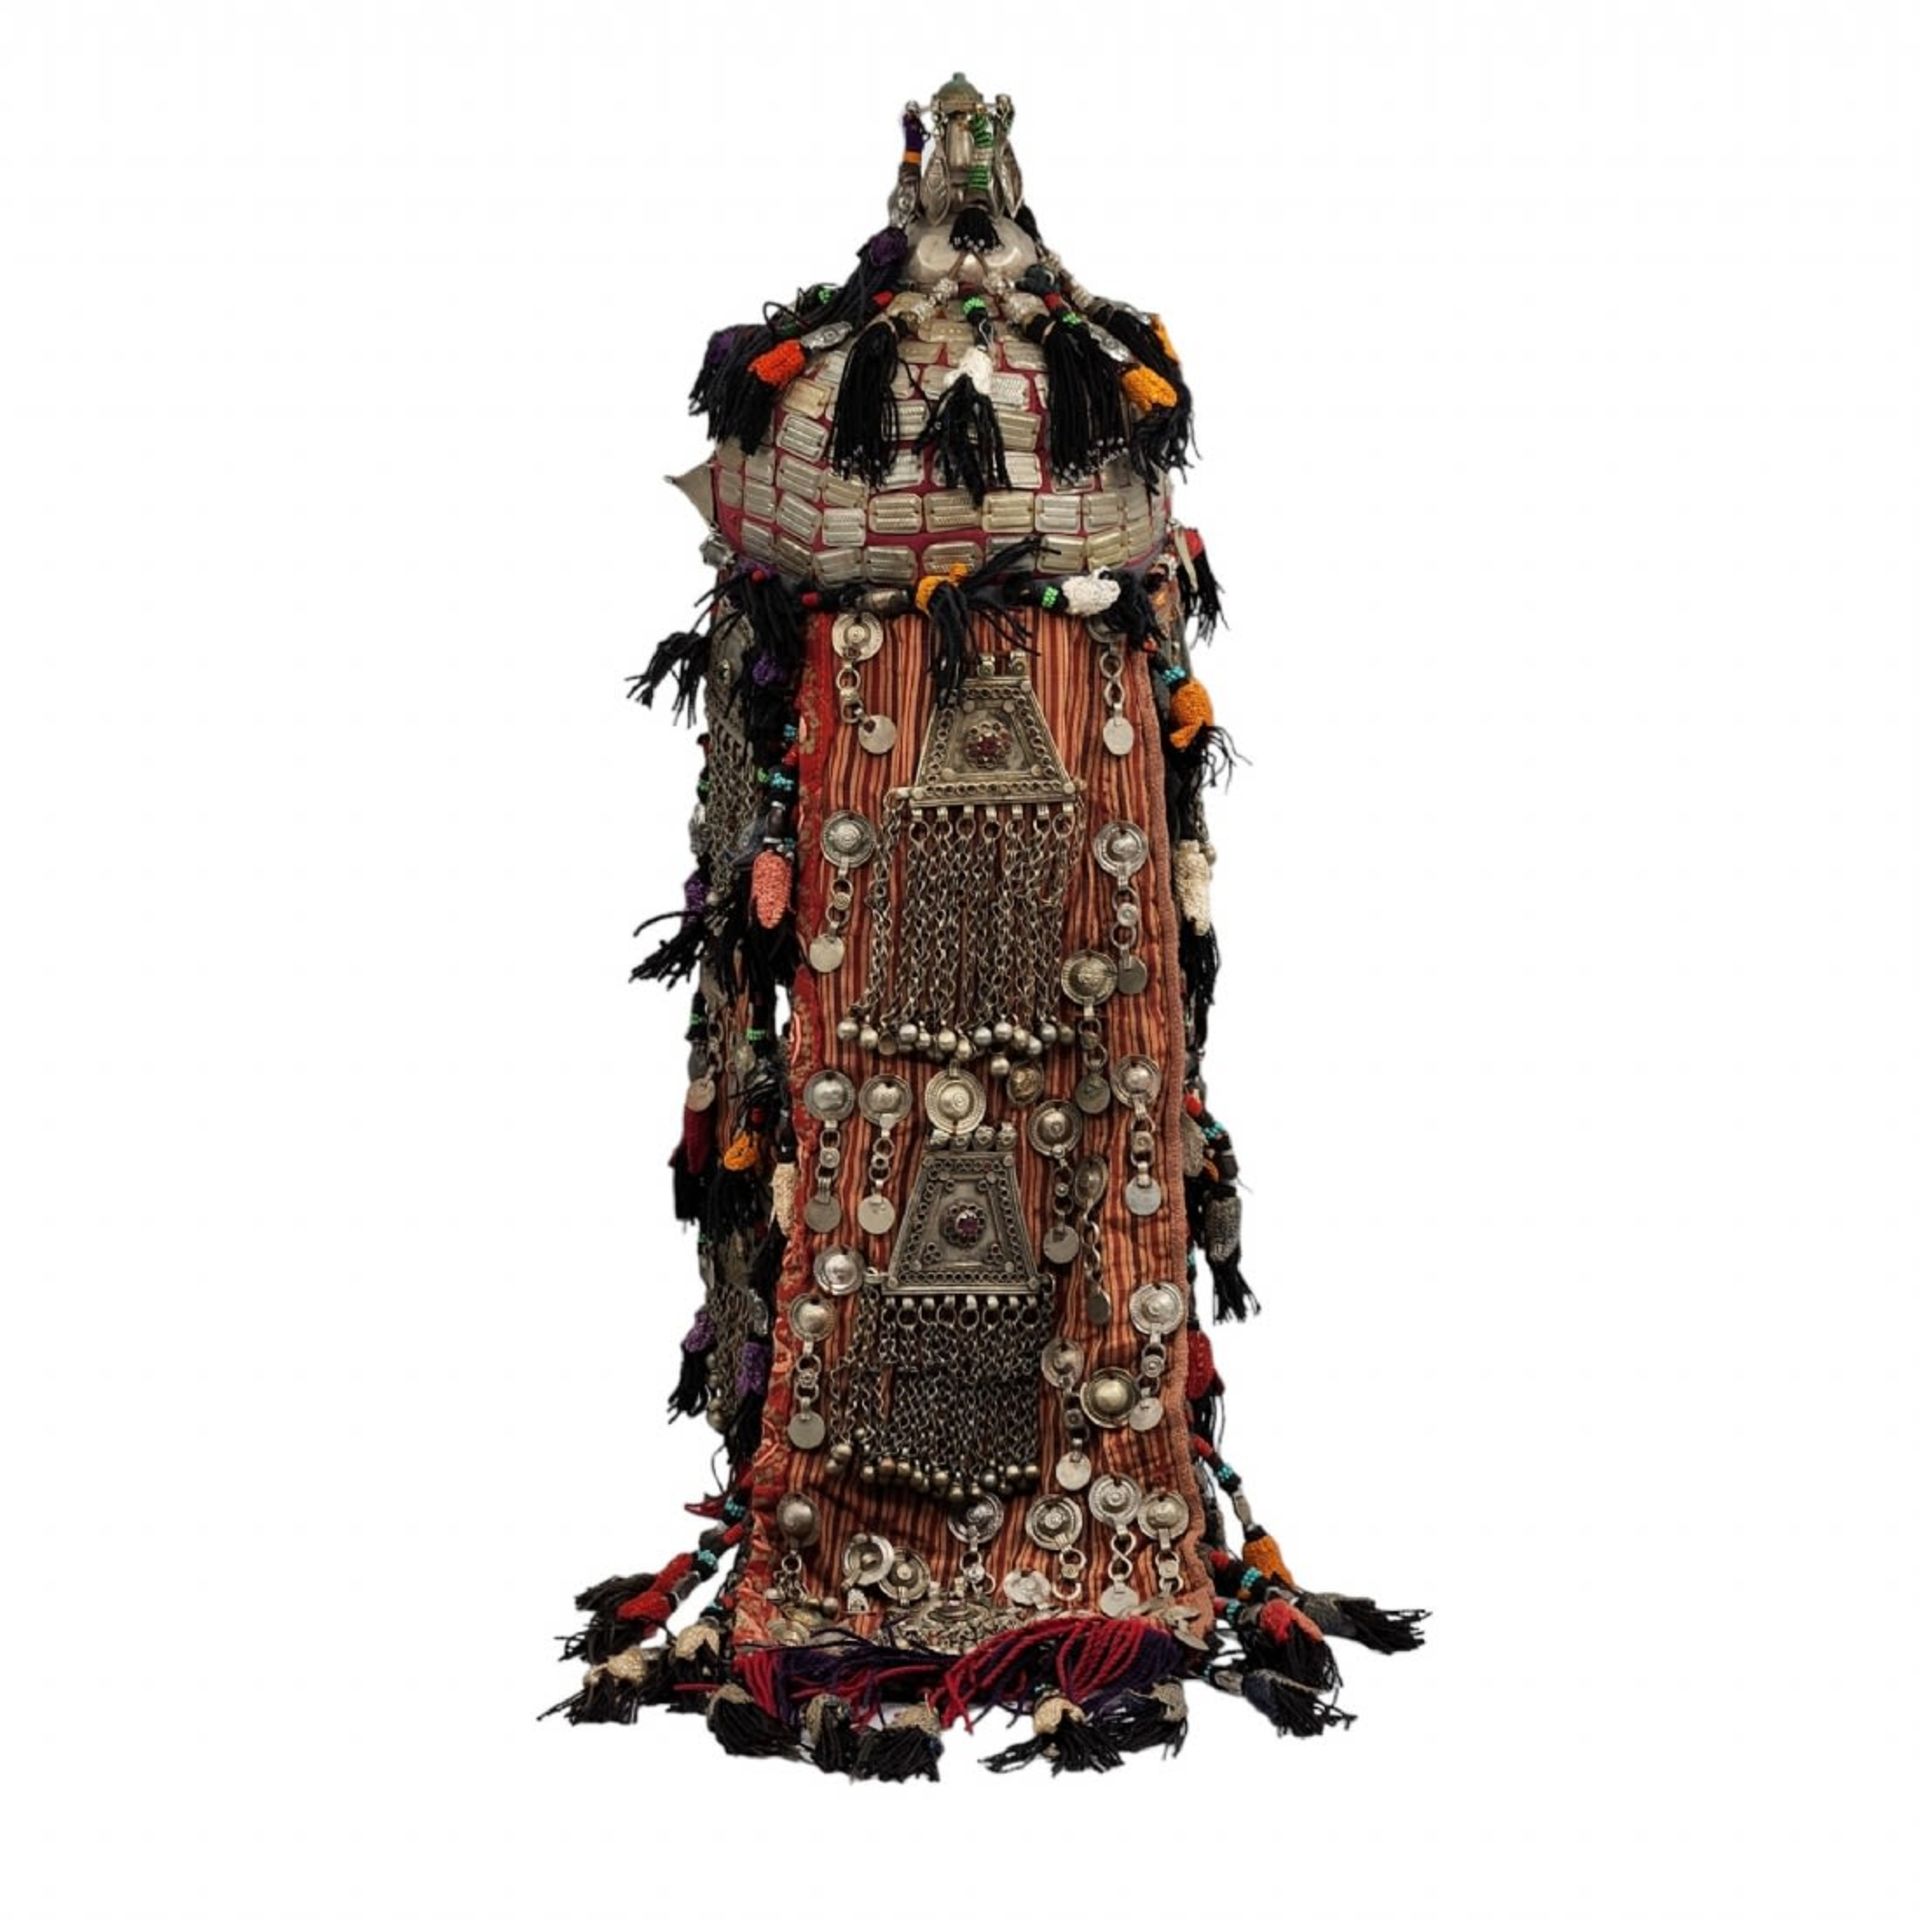 Antique Turkmen hat for a bride, 19th century, made of fabric decorated with hammered metal pieces - Image 3 of 4